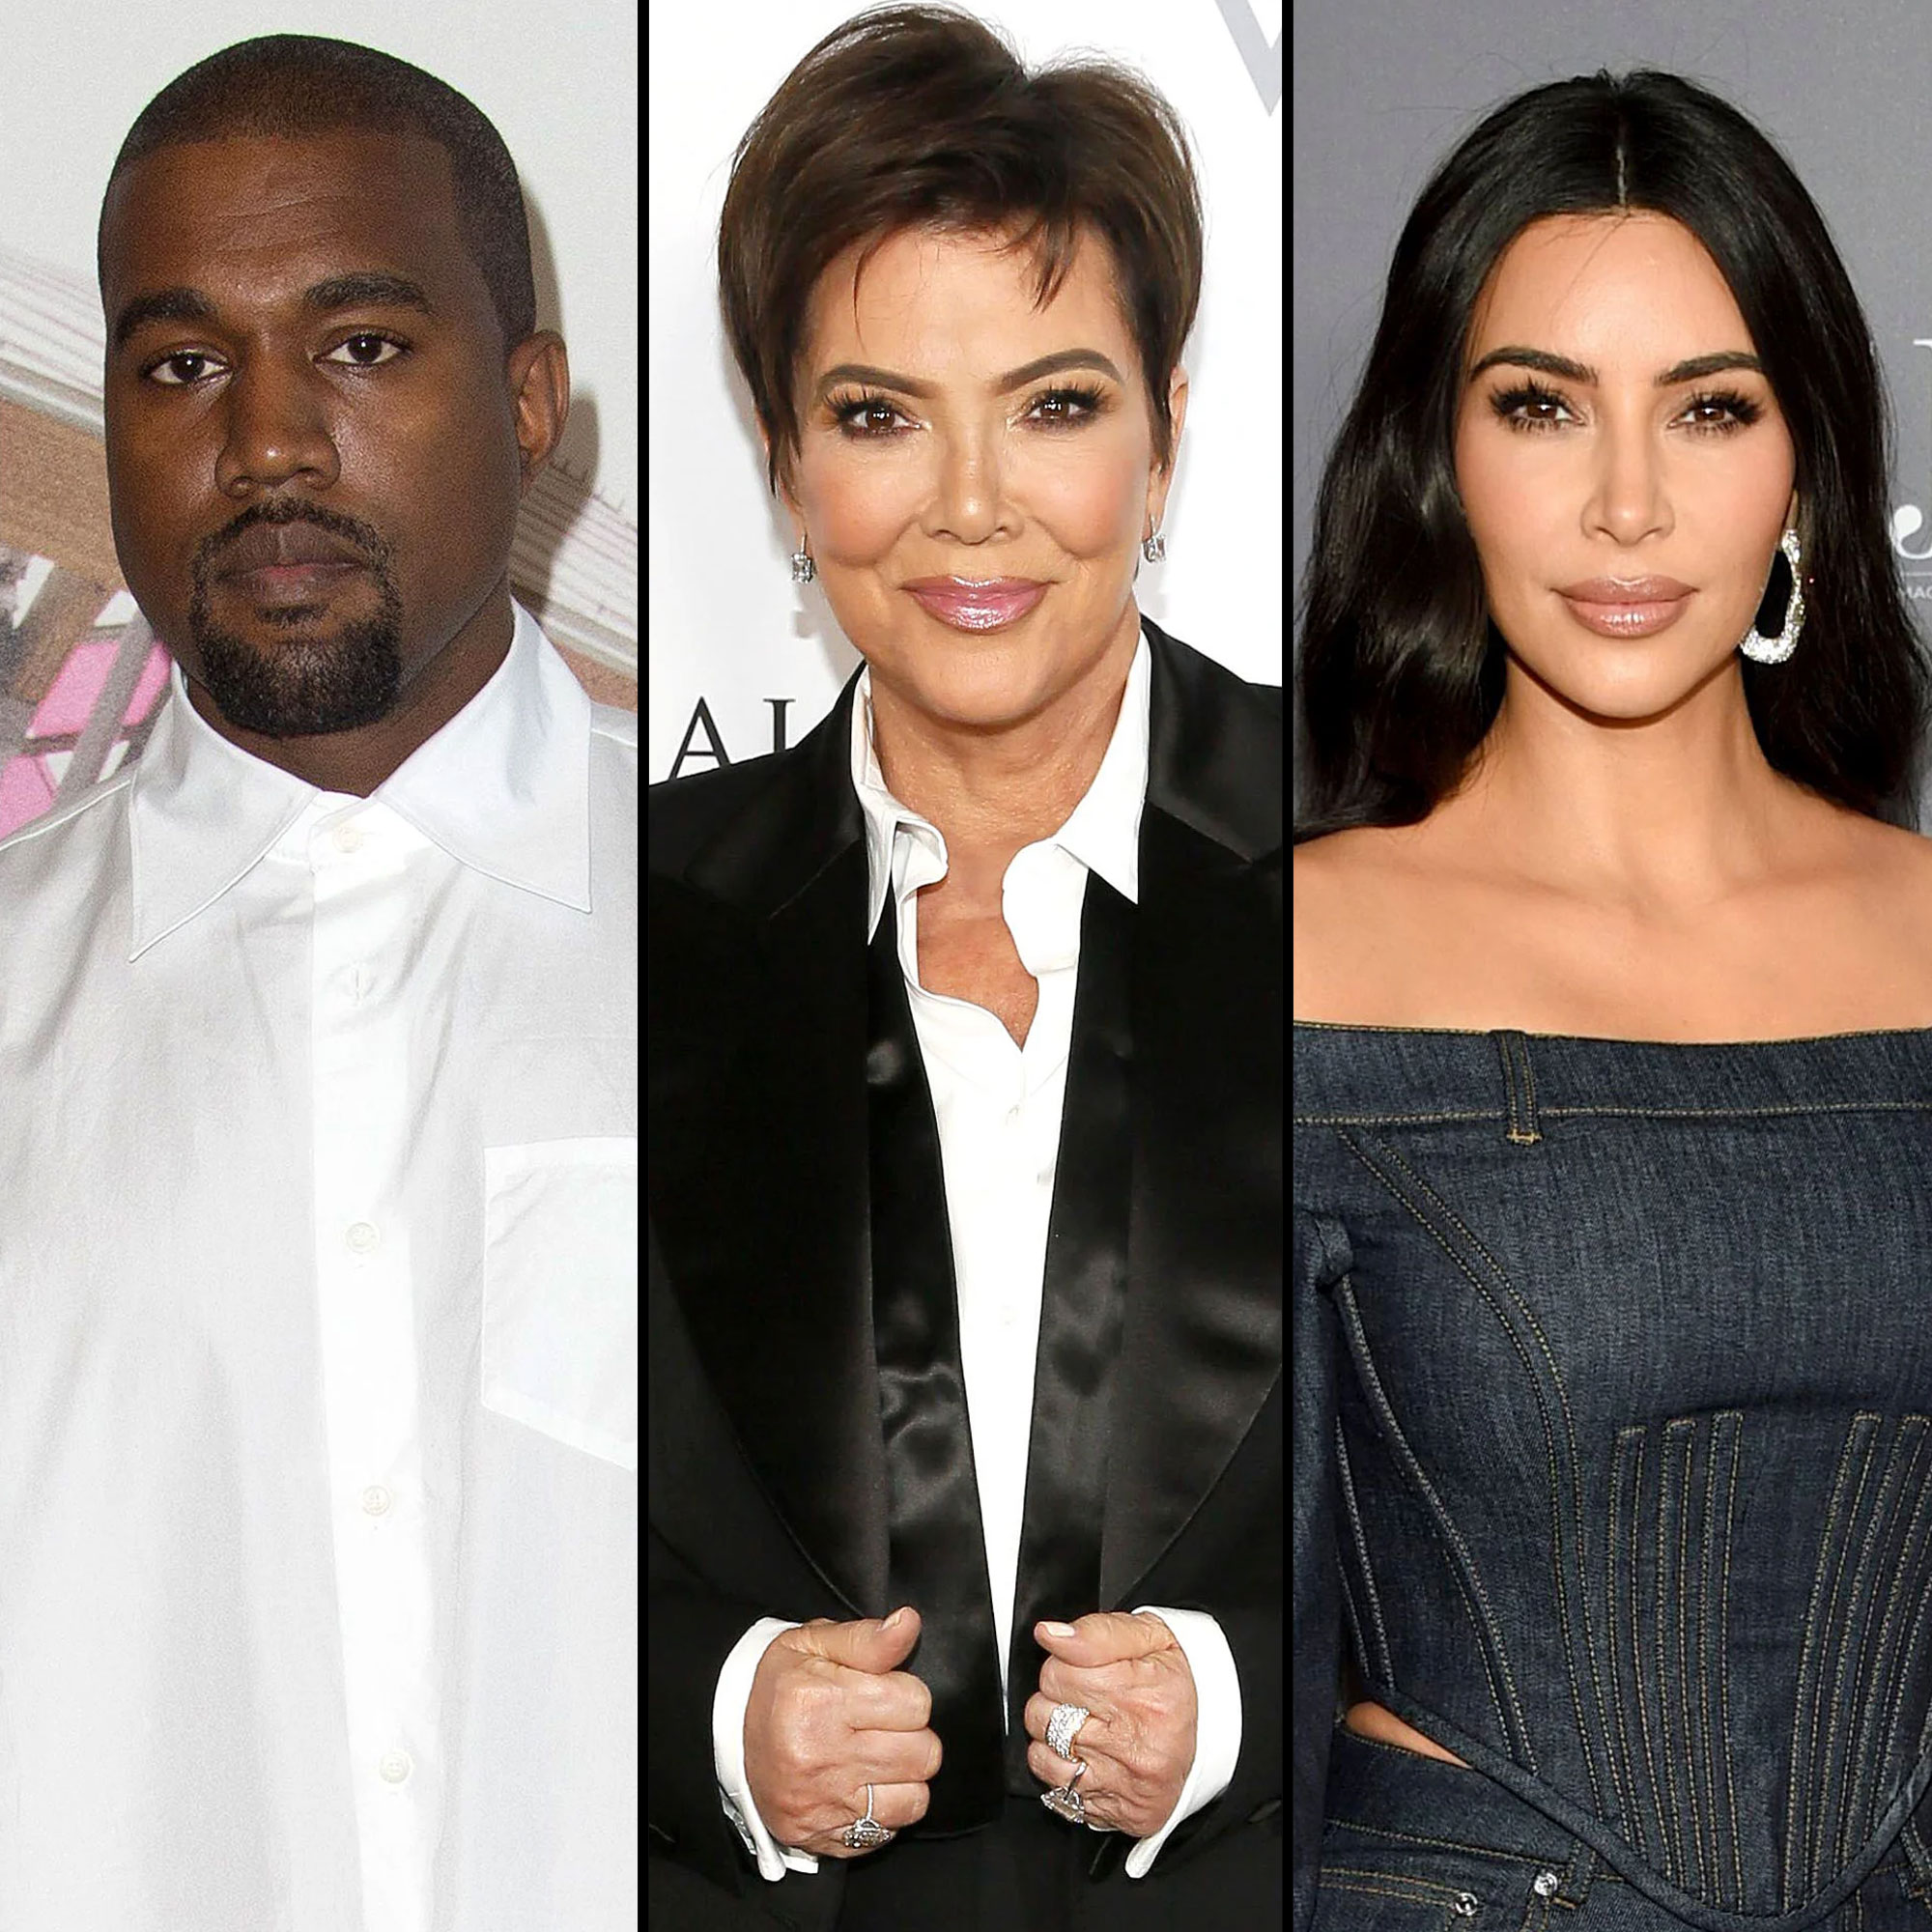 Kim Kardashin Sexy Muvi - Kanye West Calls Out Kris Jenner, Claims Porn 'Destroyed' Family